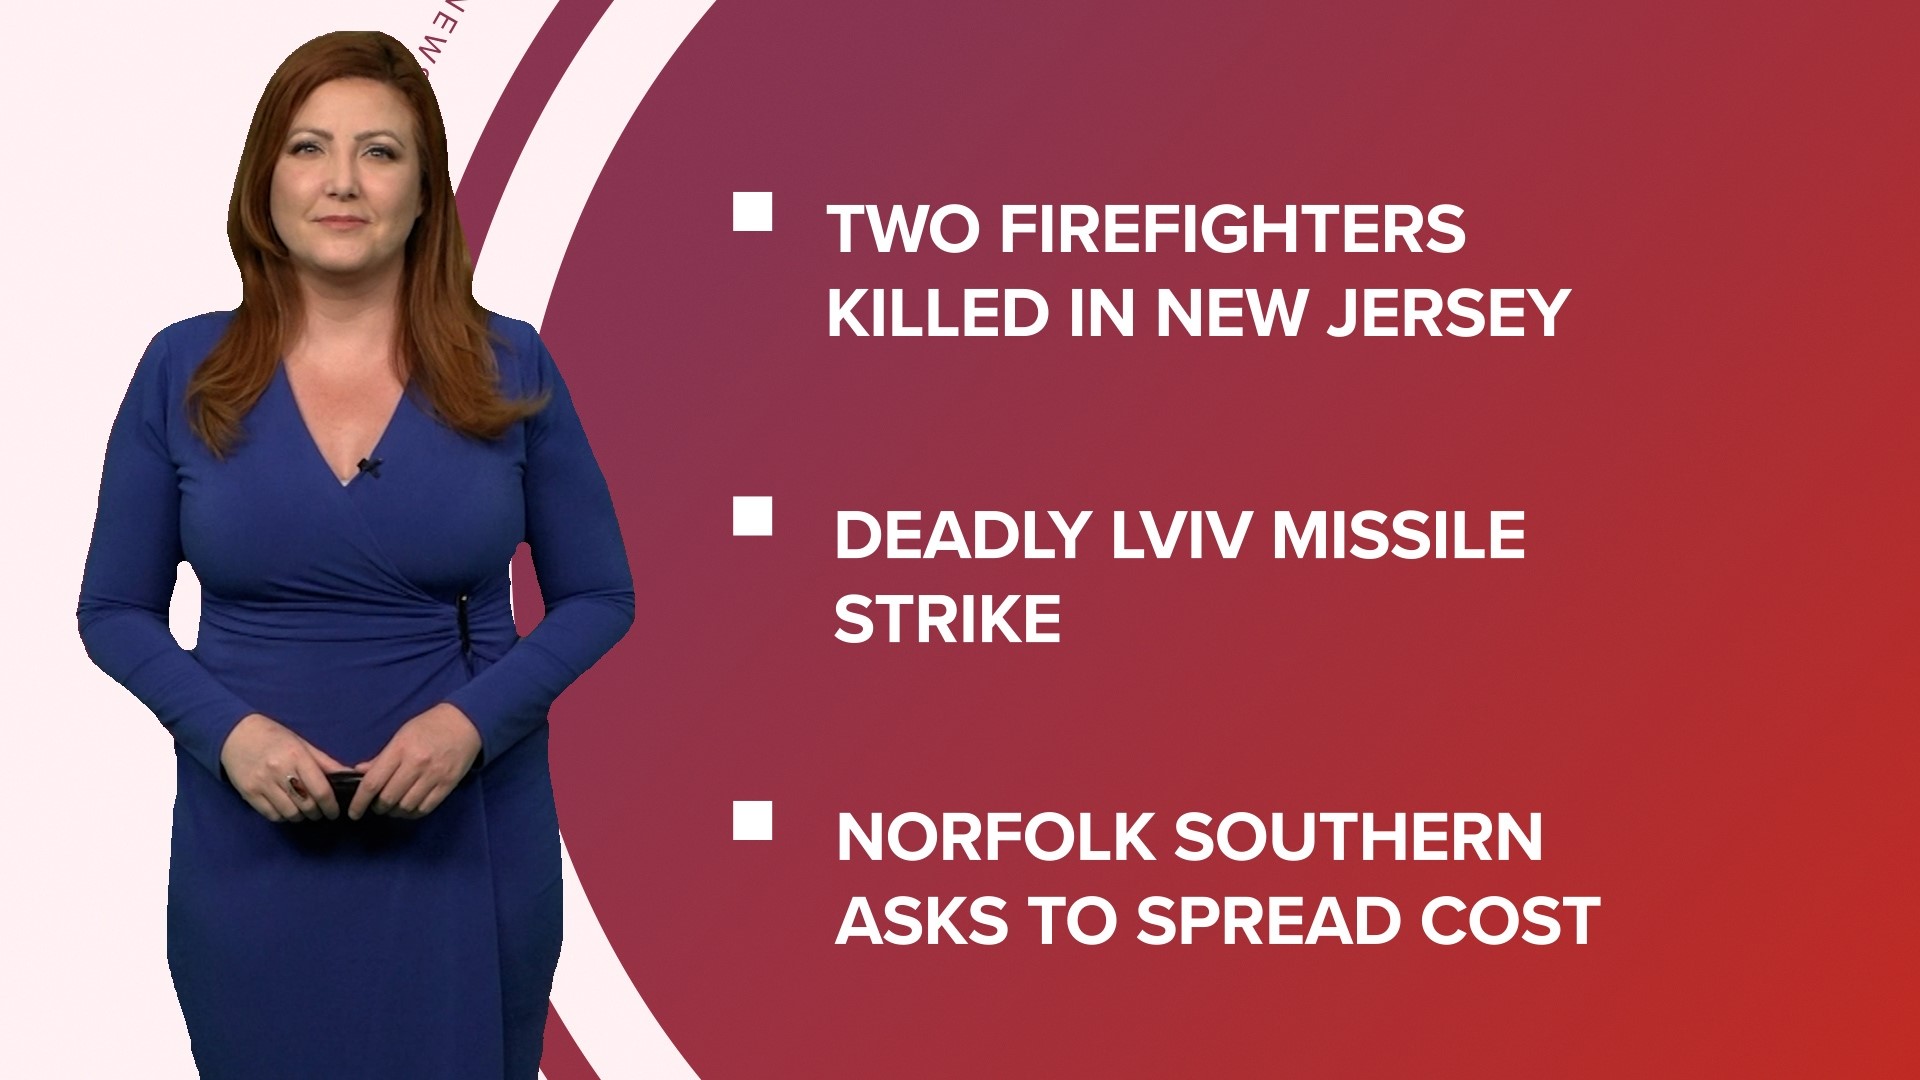 A look at what is happening in the news from two firefighters dying in a cargo ship fire in New Jersey to student loan repayment information.